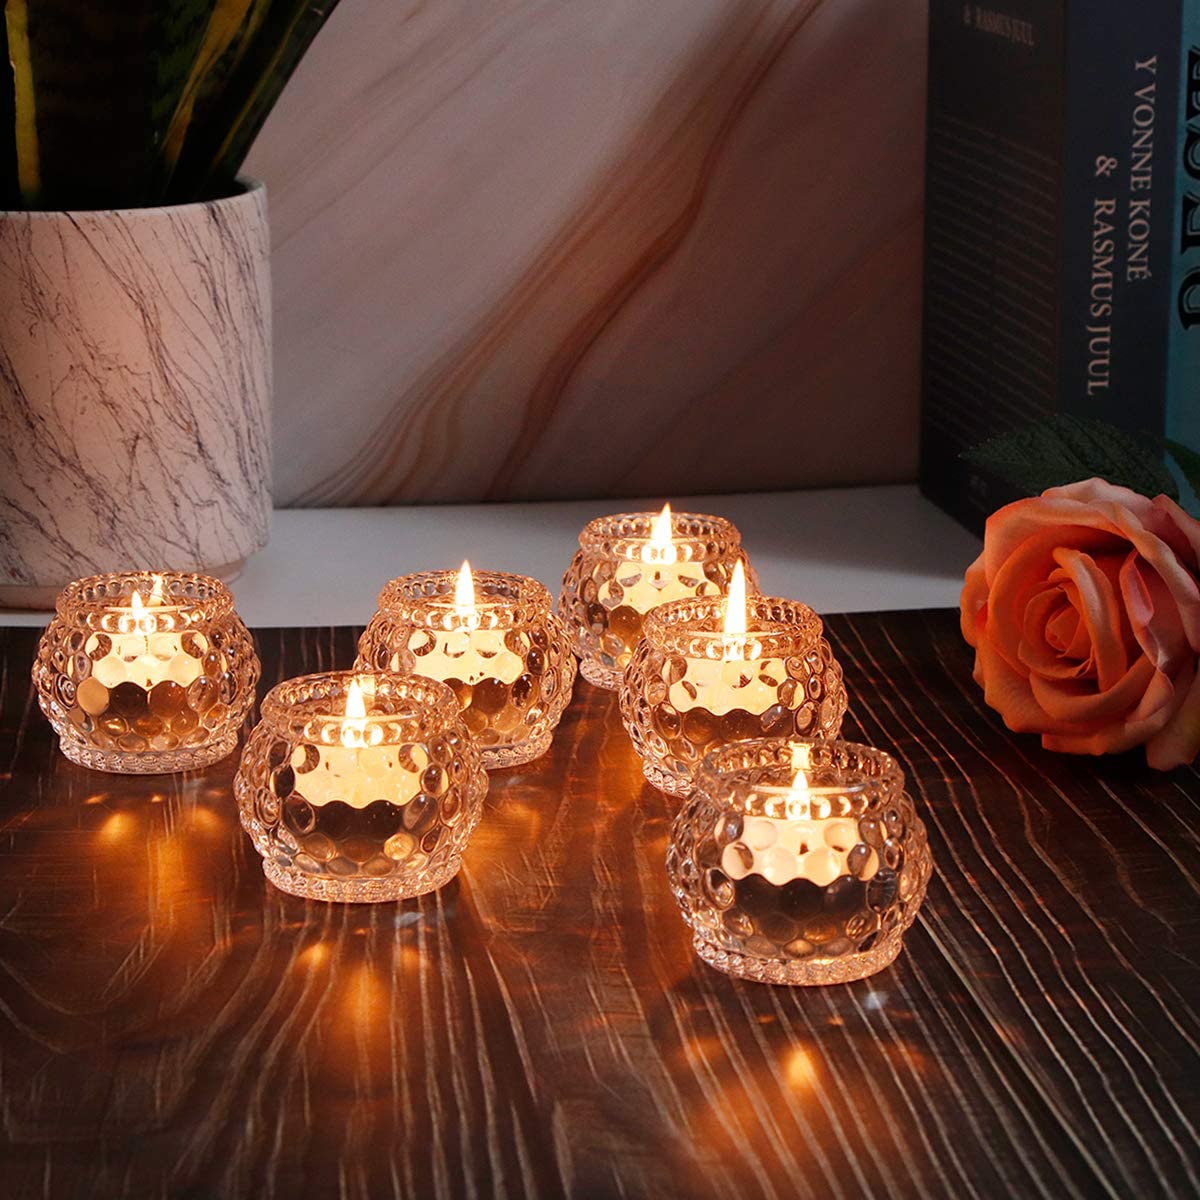 Round Clear Decorative Candle Holder for Table, Home Party Wedding Decor